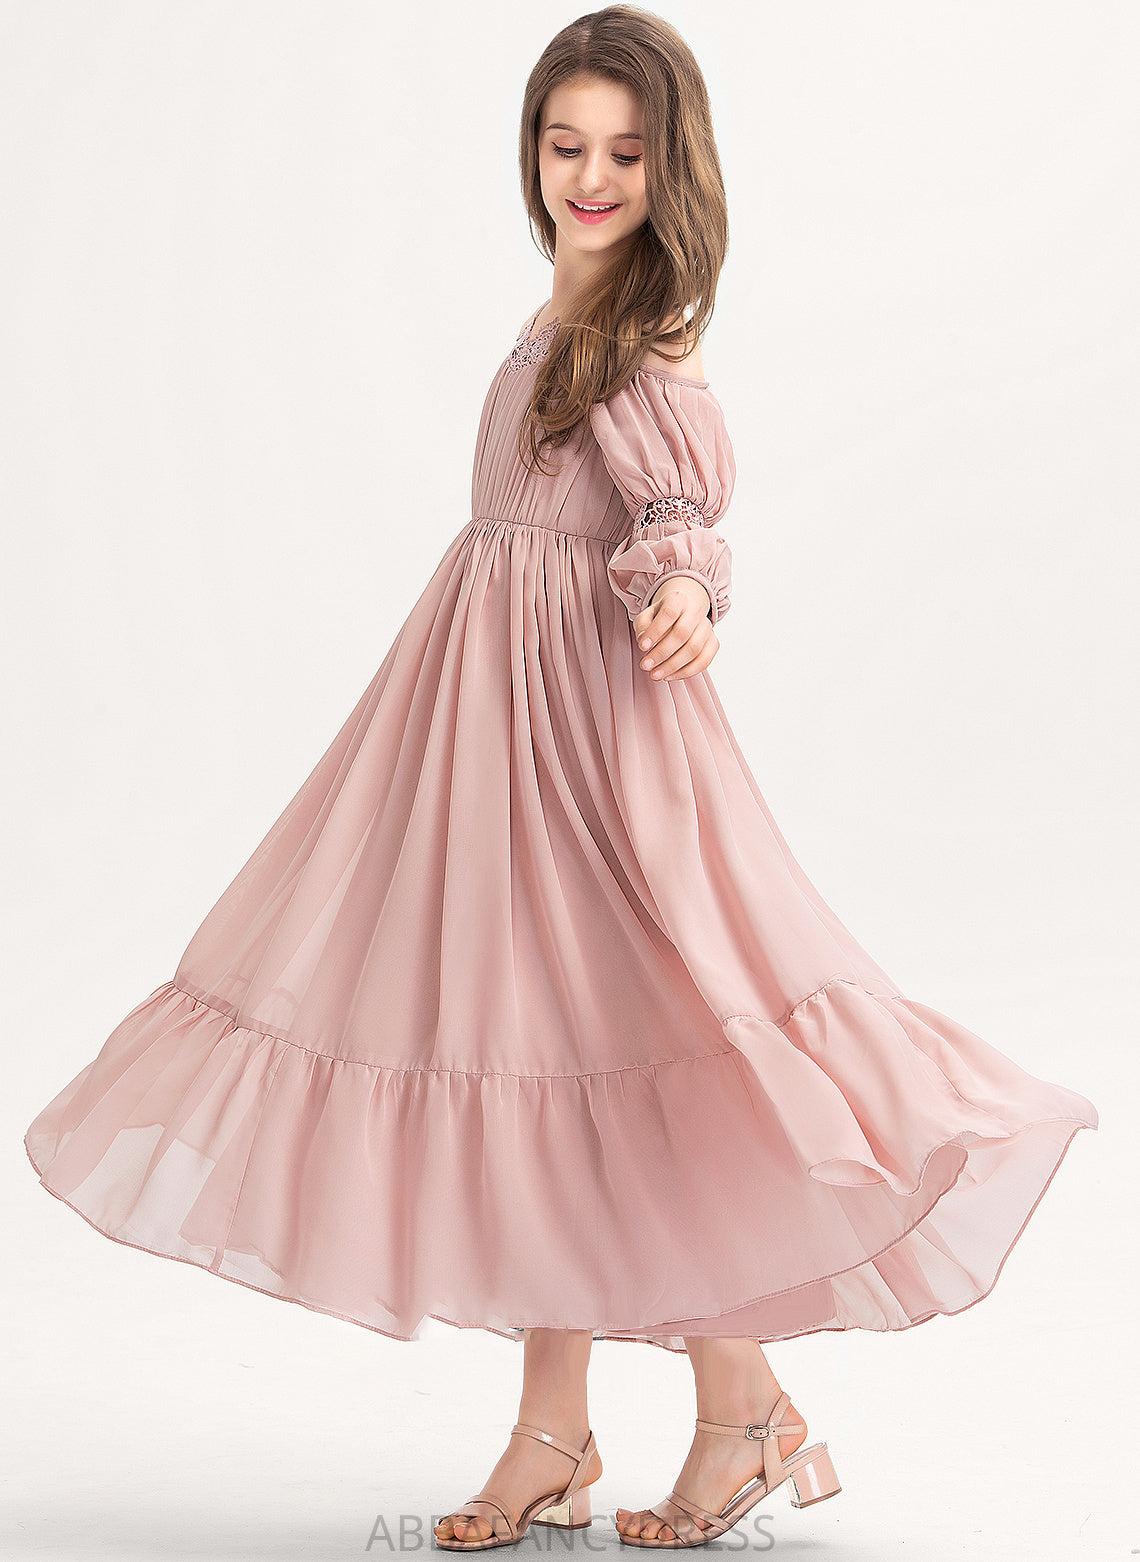 Ruffle Junior Bridesmaid Dresses Square Neckline Paityn With Lace Ankle-Length Chiffon A-Line